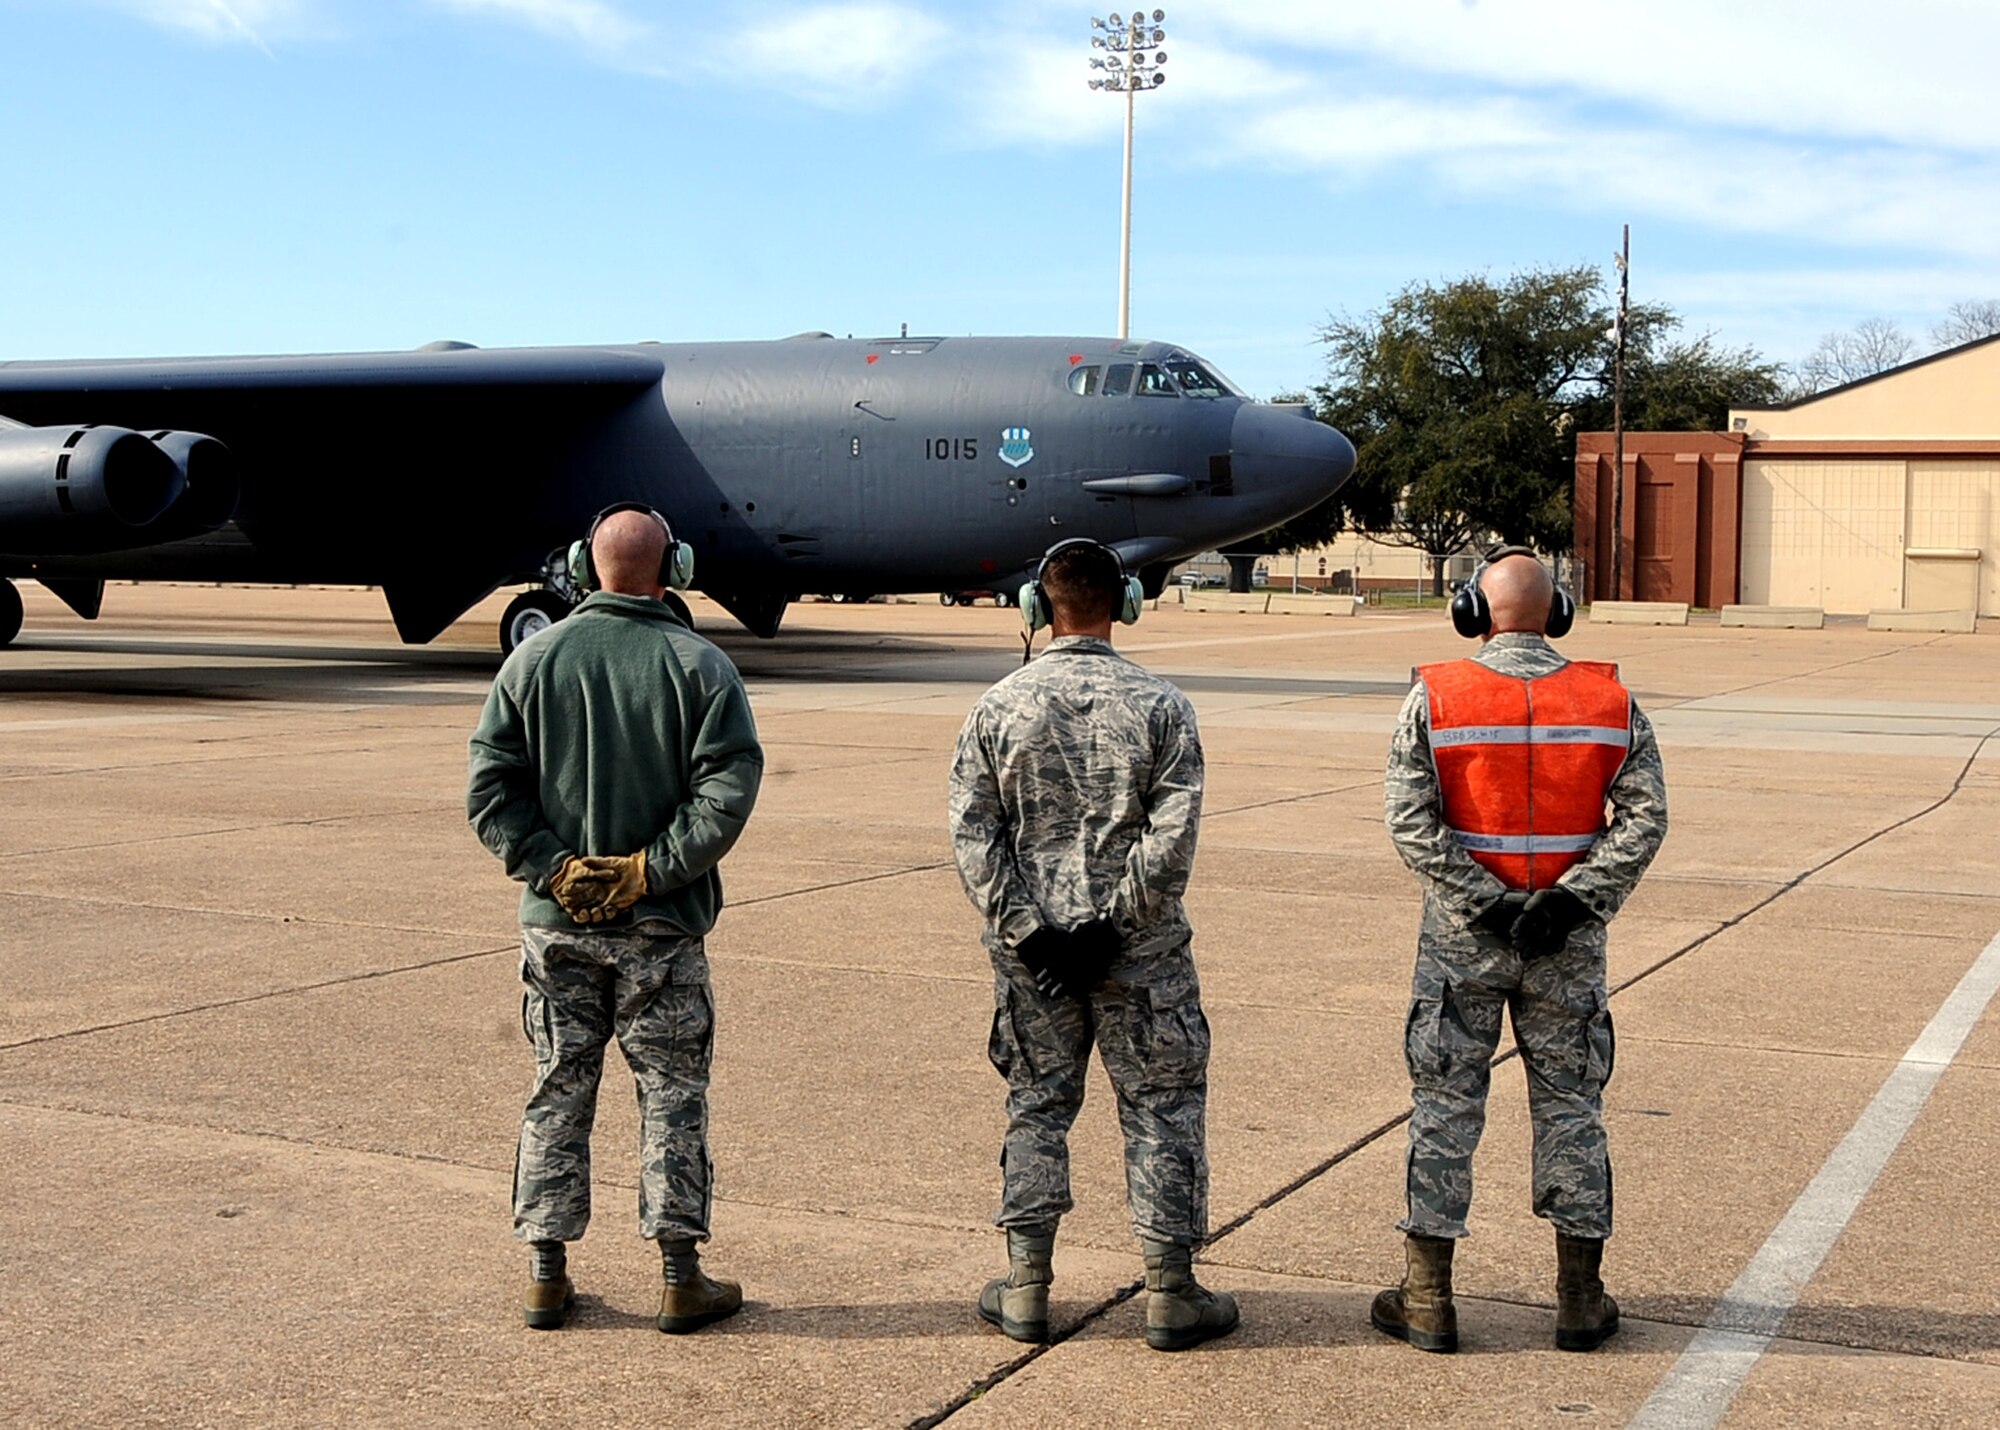 Chief Master Sgt. Brian Hornback, Air Force Global Strike Command command chief, prepares to marshal a B-52H Stratofortress with Airmen from the 20th Aircraft Maintenance Squadron on Barksdale Air Force Base, La., March 7. Hornback got the opportunity to relive his junior enlisted days as a B-52 crew chief on a recent visit to the 2nd Bomb Wing. (U.S. Air Force photo/Staff Sgt. Jason McCasland)